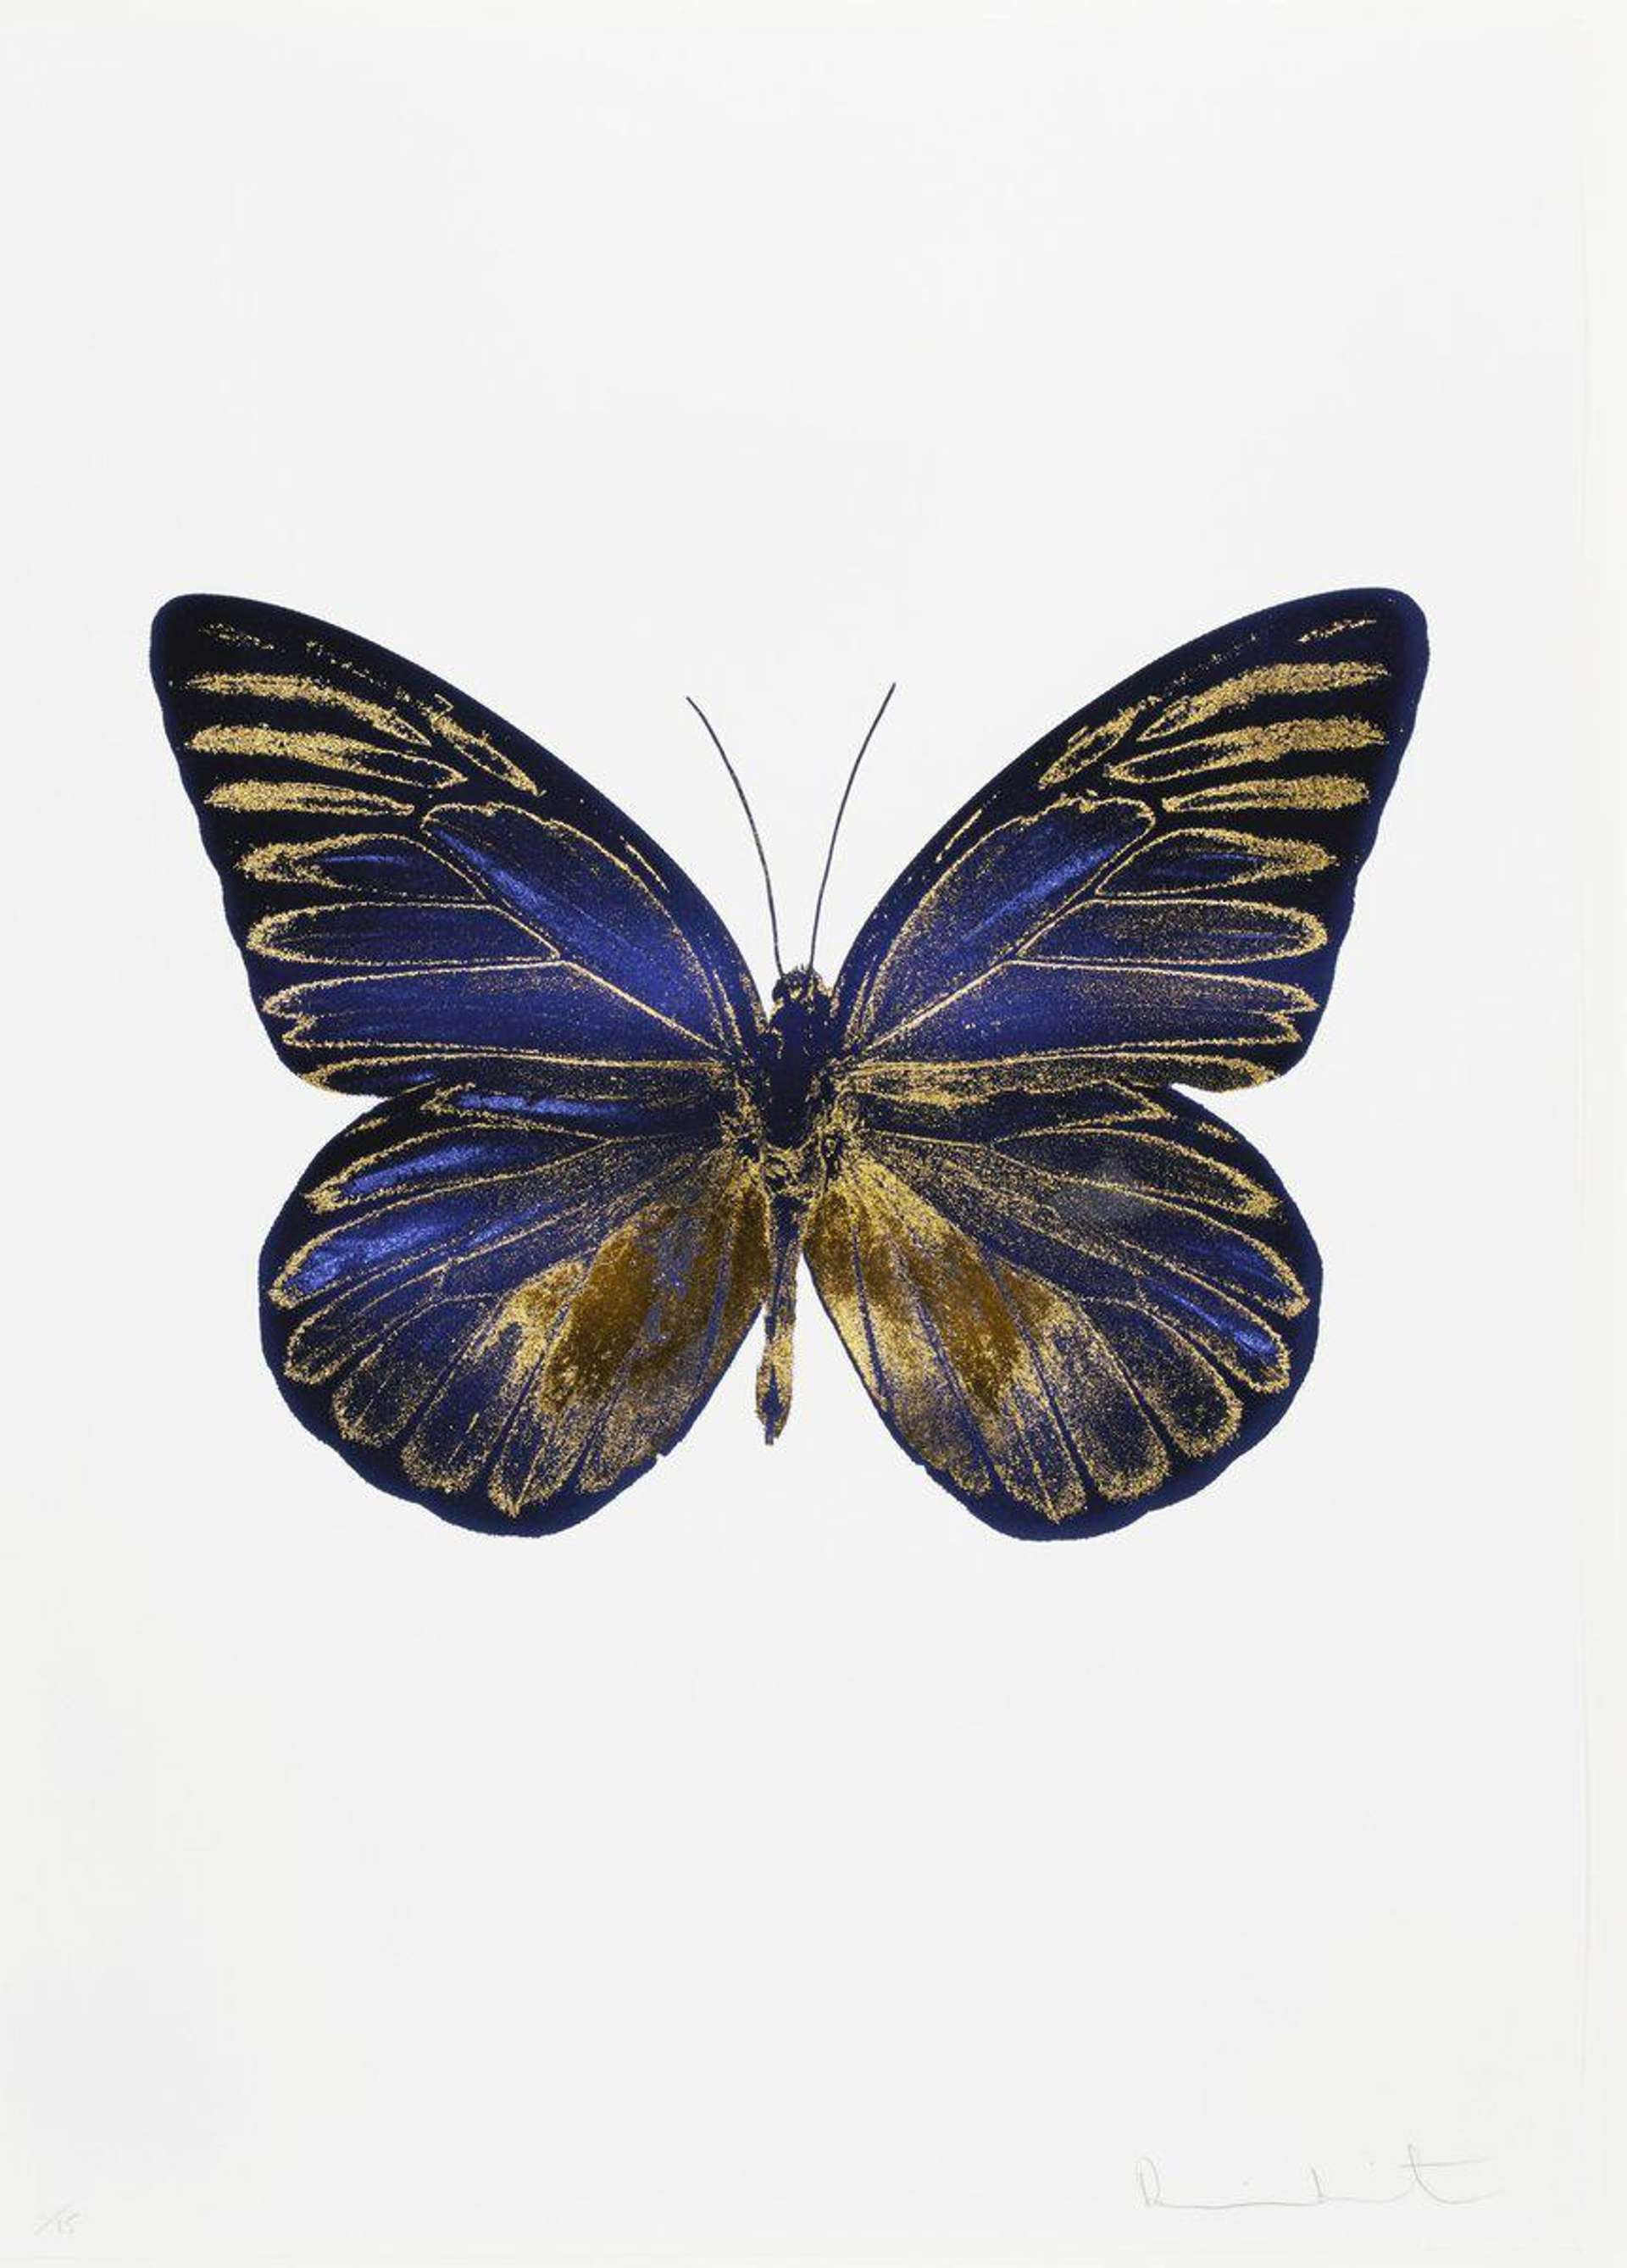 The Souls I (imperial purple, oriental gold) by Damien Hirst